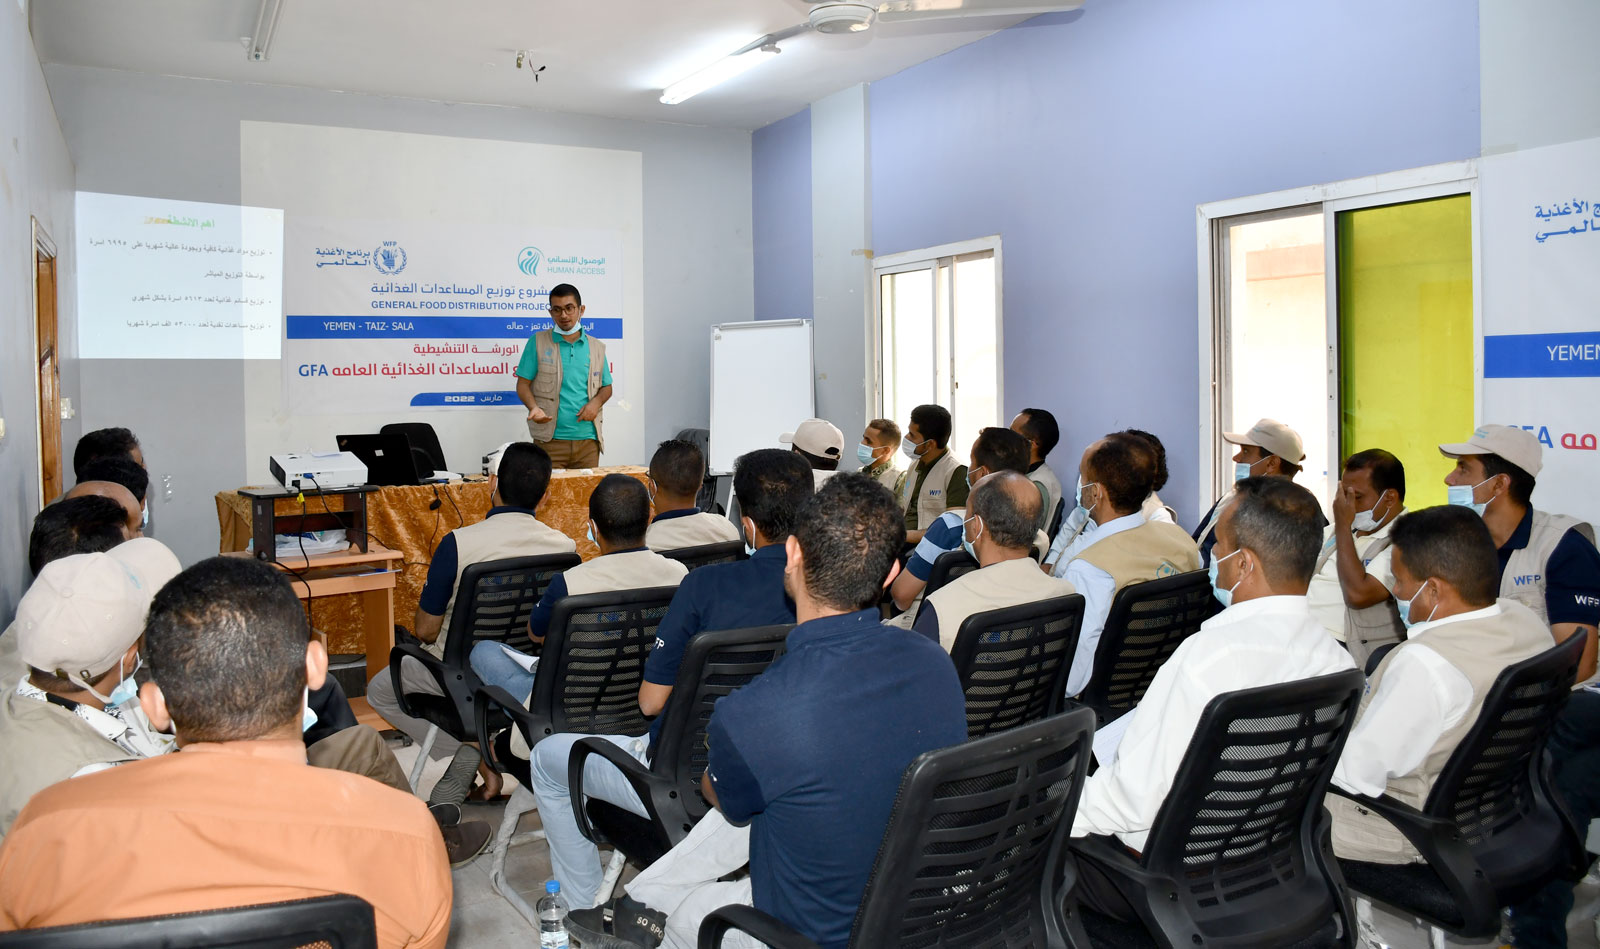 In partnership with WFP Organizing training workshops for workers in General Food Assistance Project in Taiz